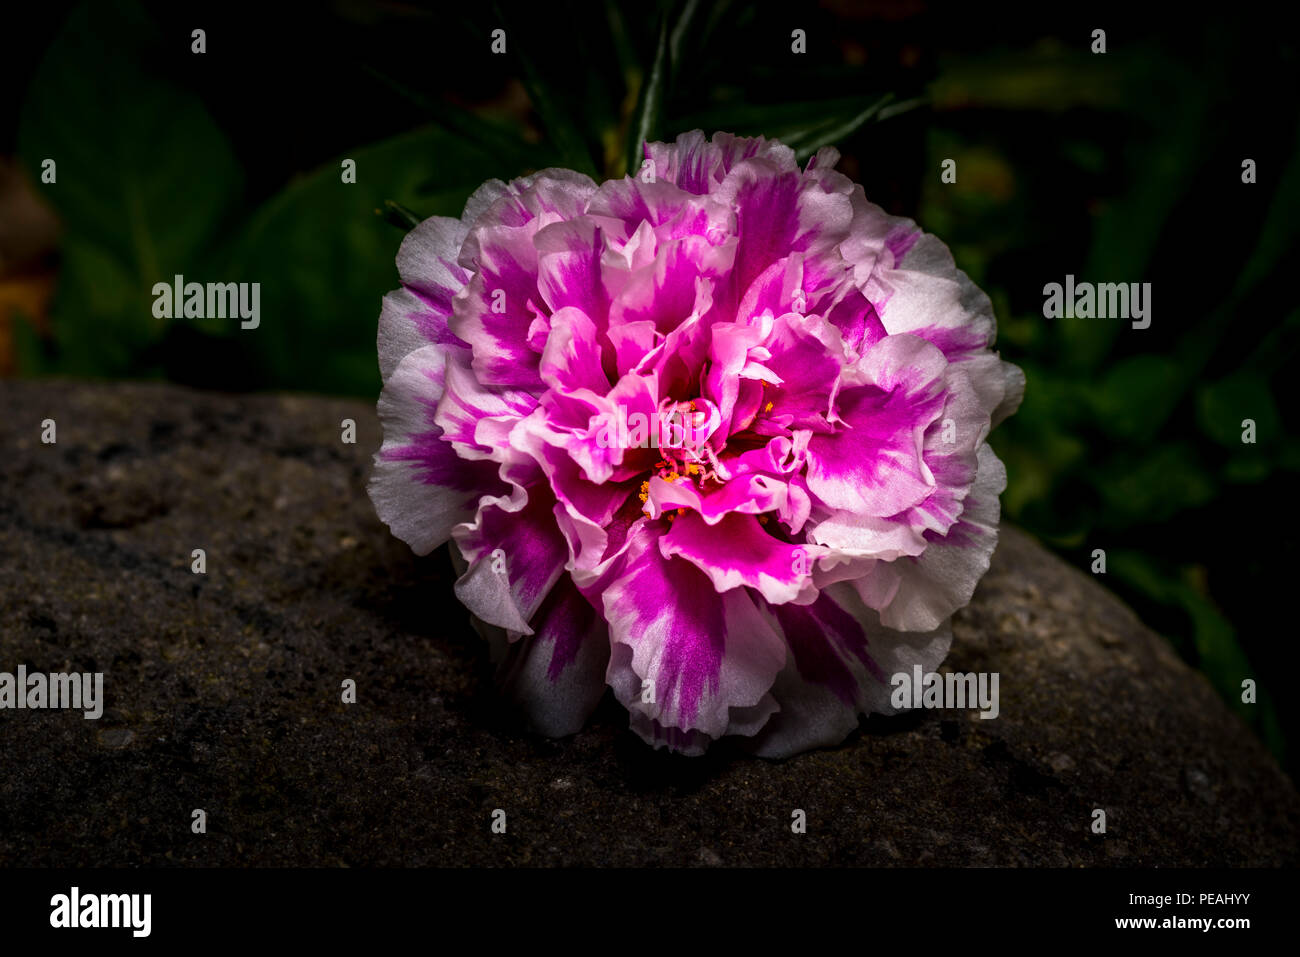 Pink and white clove nelke flower in front of dark background Stock Photo